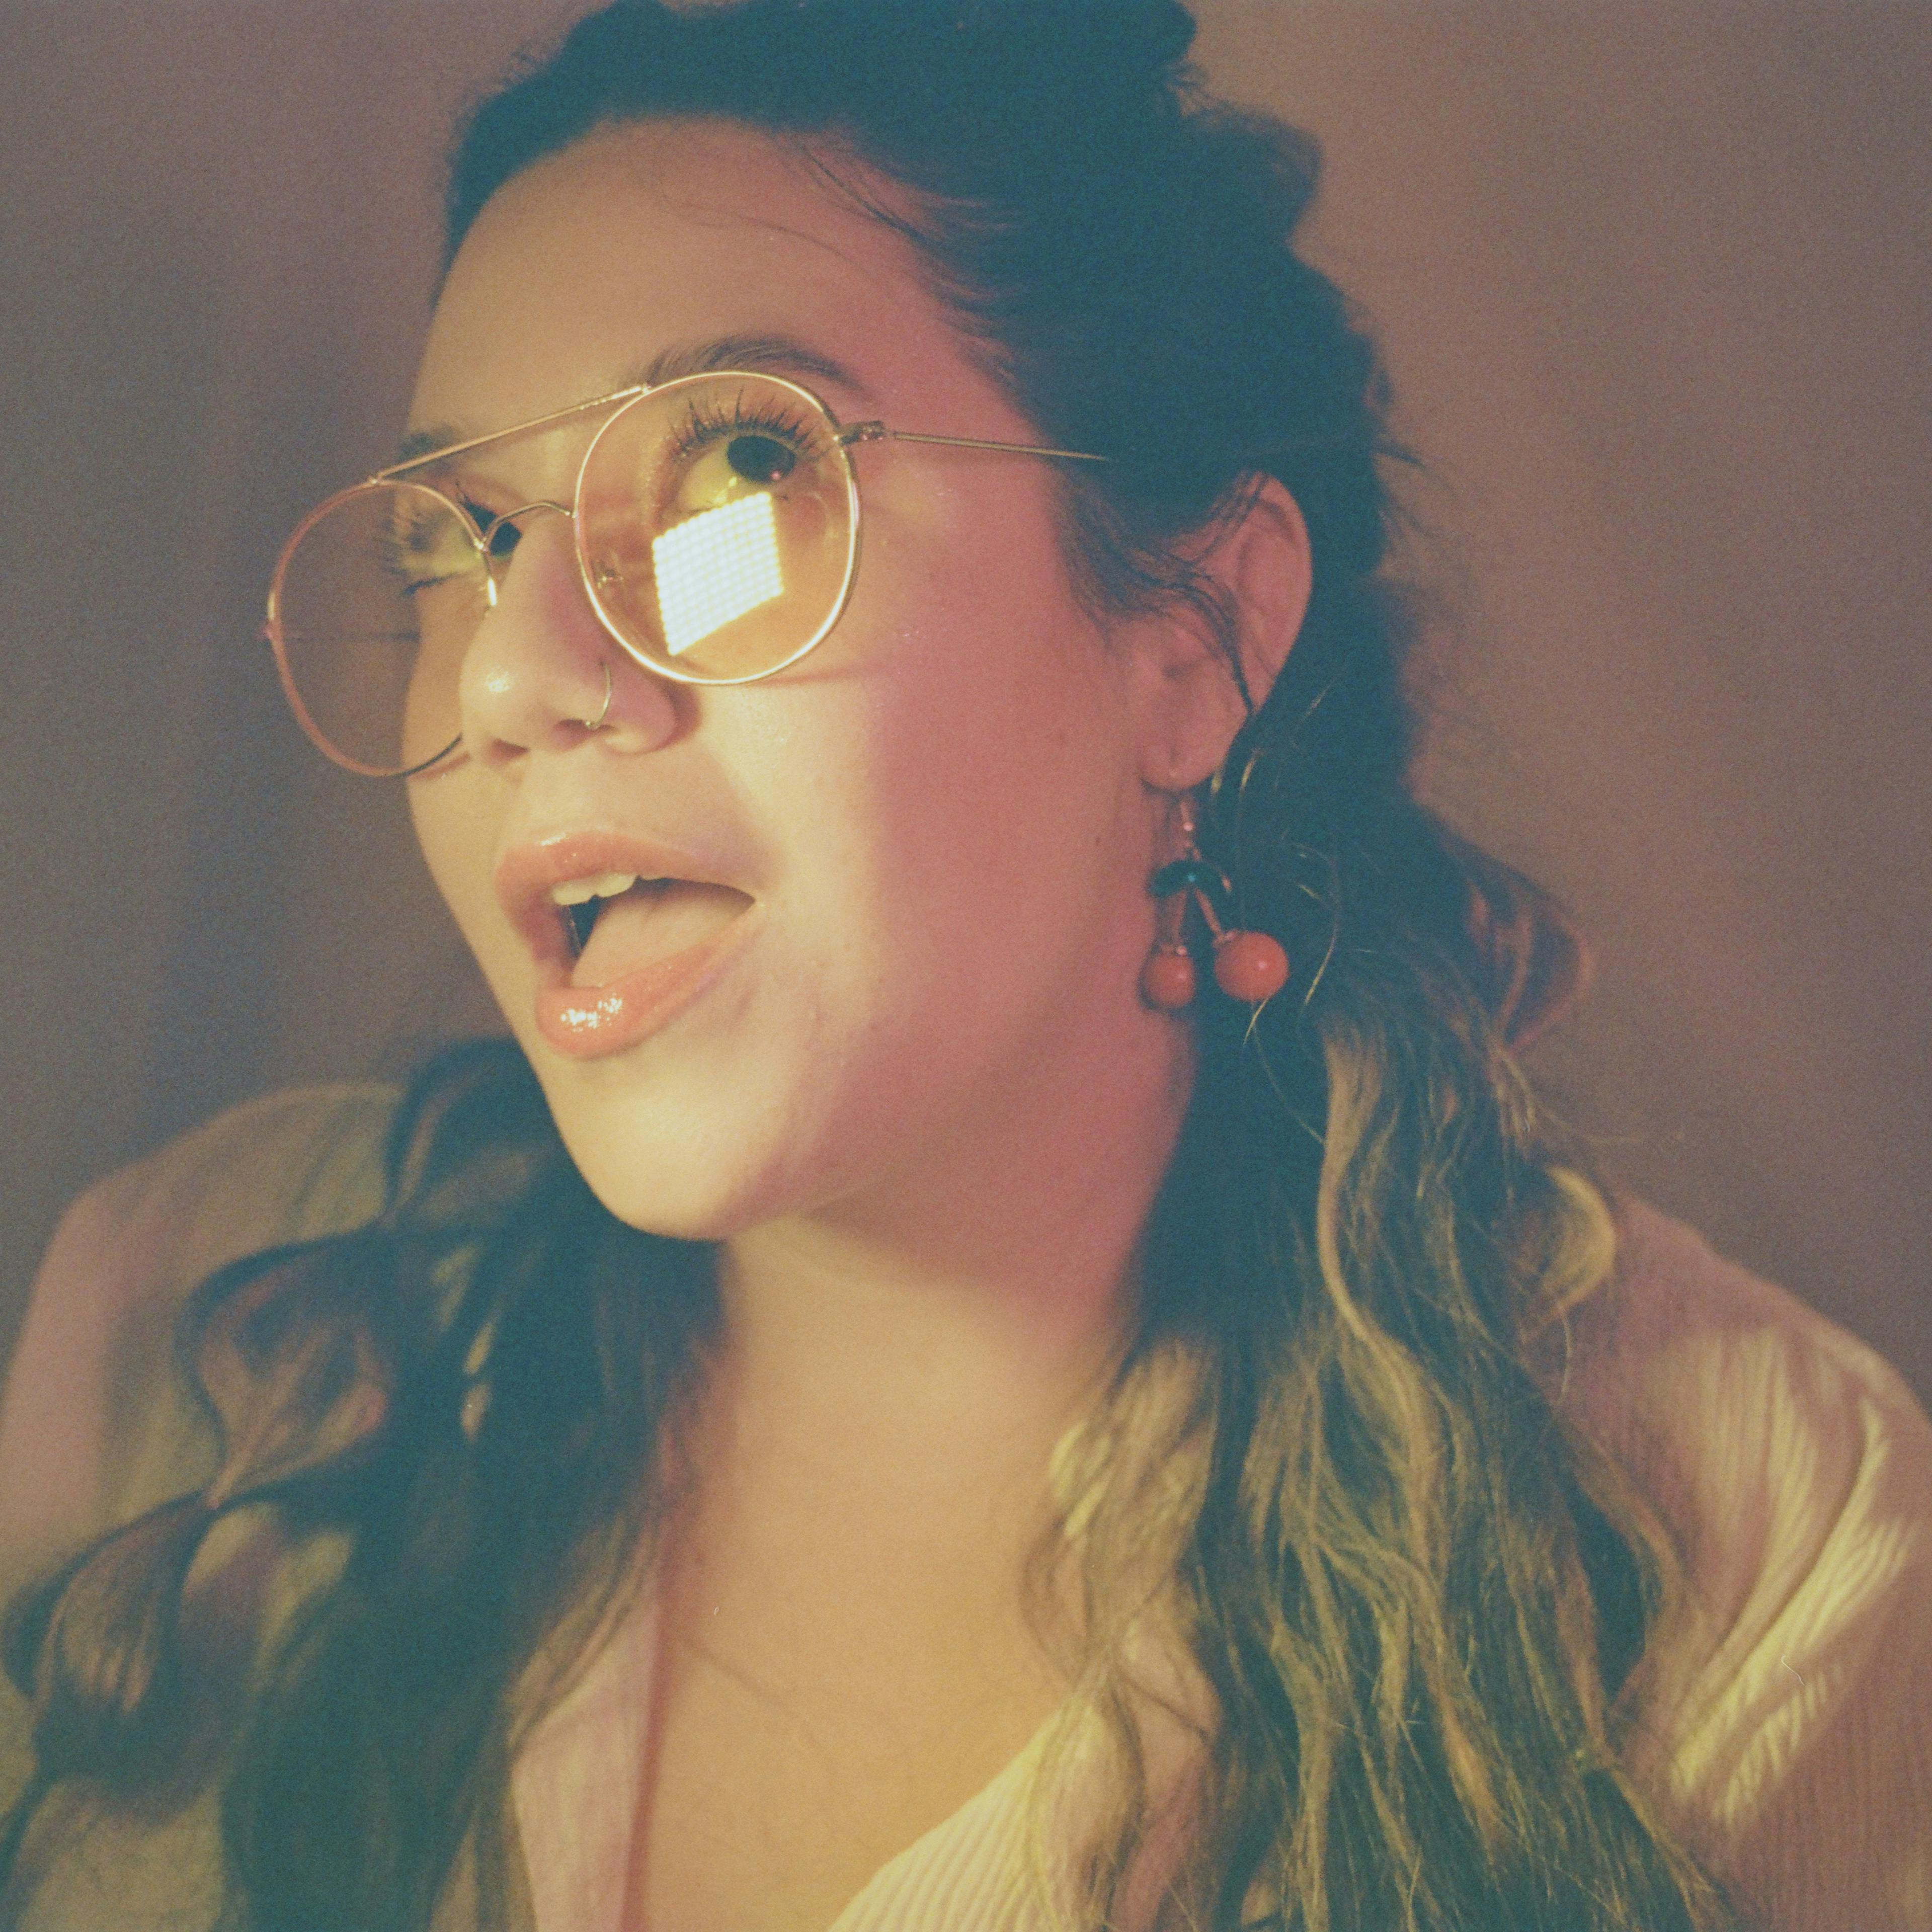 Portrait of woman with studio lighting and cherry earrings on film by Natalie Carrasco